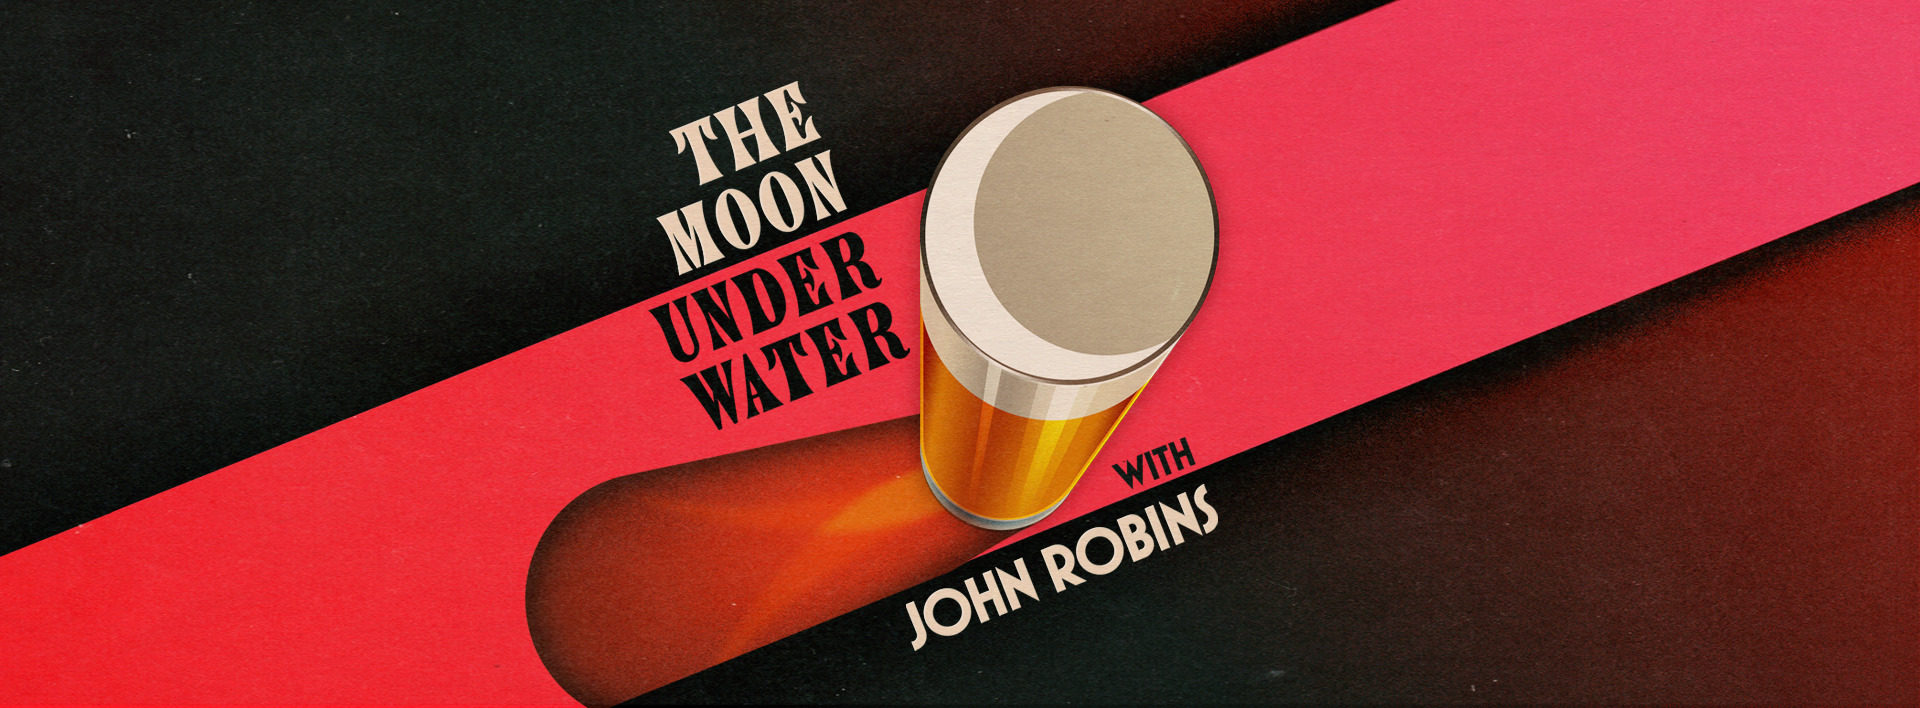 The Moon Under Water Live… with Elis James